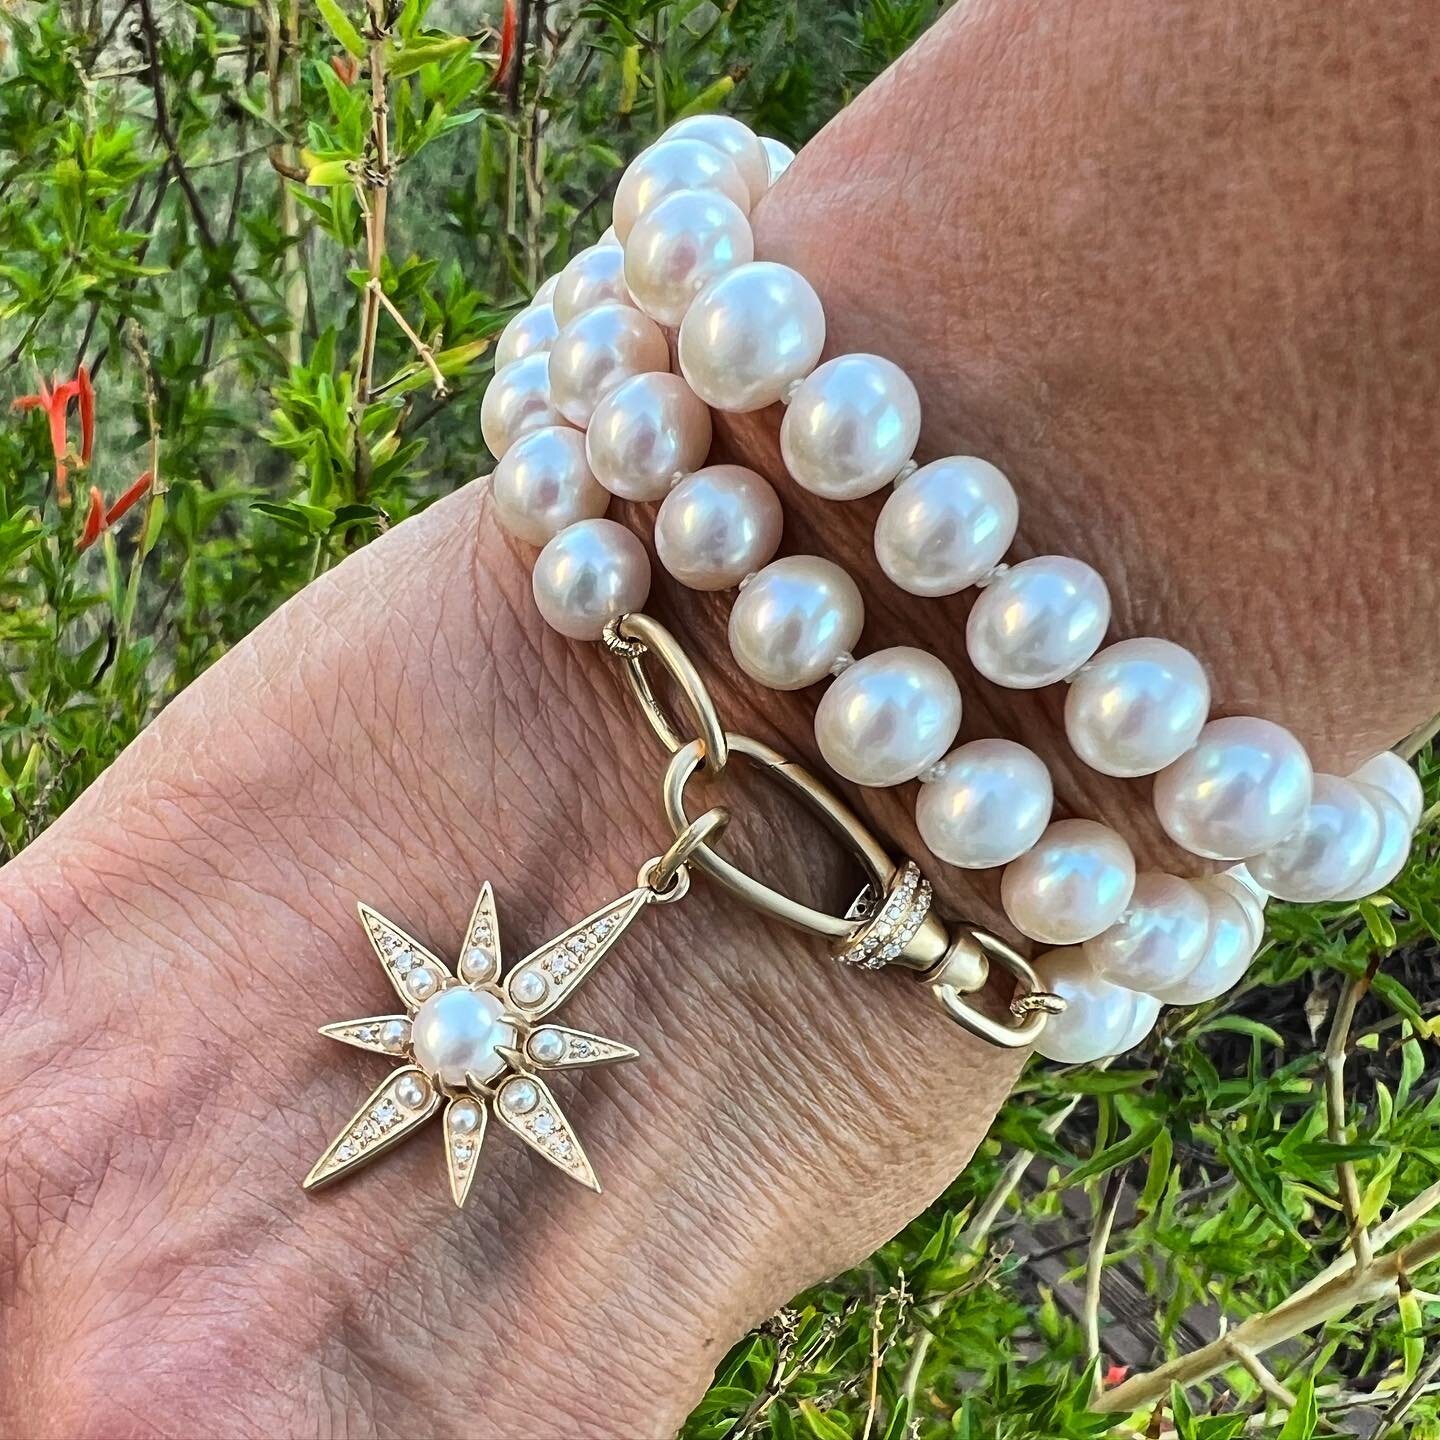 This new design is on it's way to @choices_pittsburgh!! 

Wear as a triple wrap bracelet or a necklace!!!

.
.
.
.
#newdesigns #fall2023 #trunkshow #diamonds #pearl #pearlnecklace #sparkle #gold #compass #celestial #stars #versatilejewelry #wrapbrace